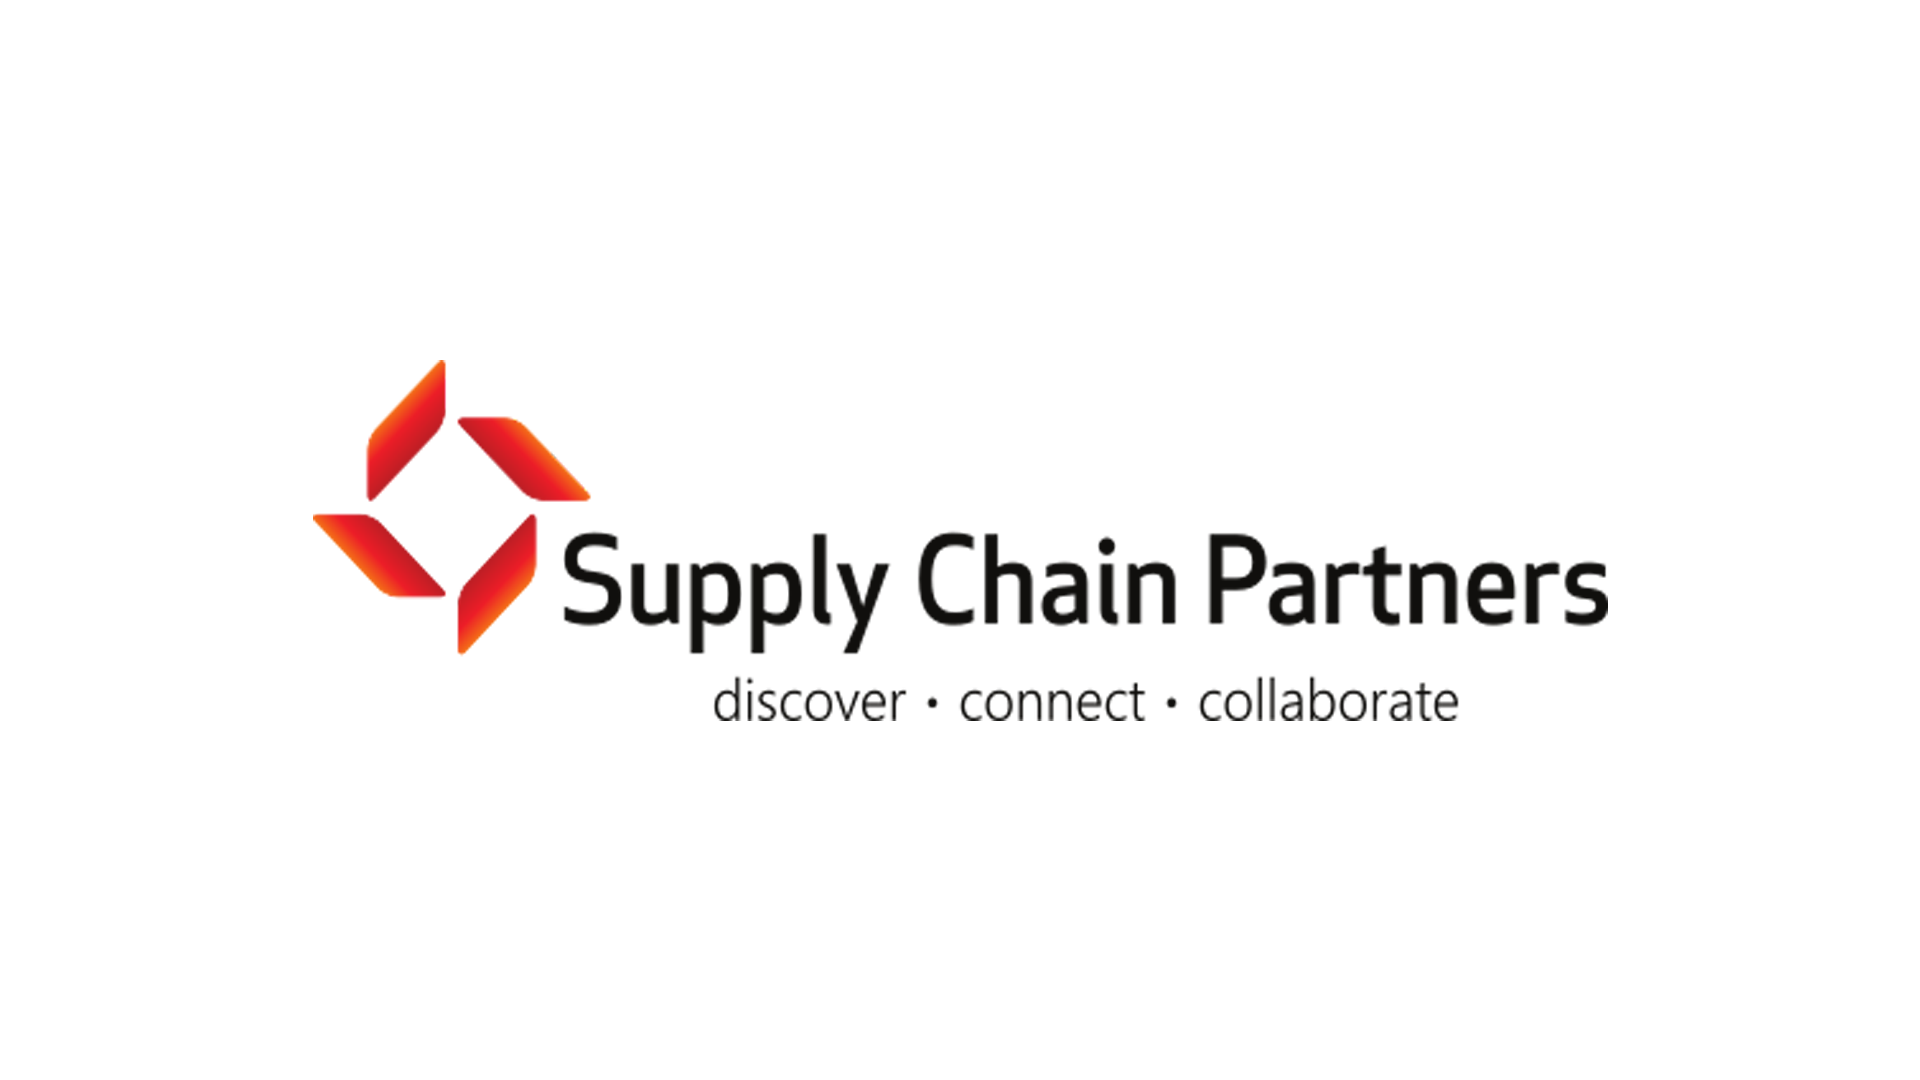 Supply Chain Partners